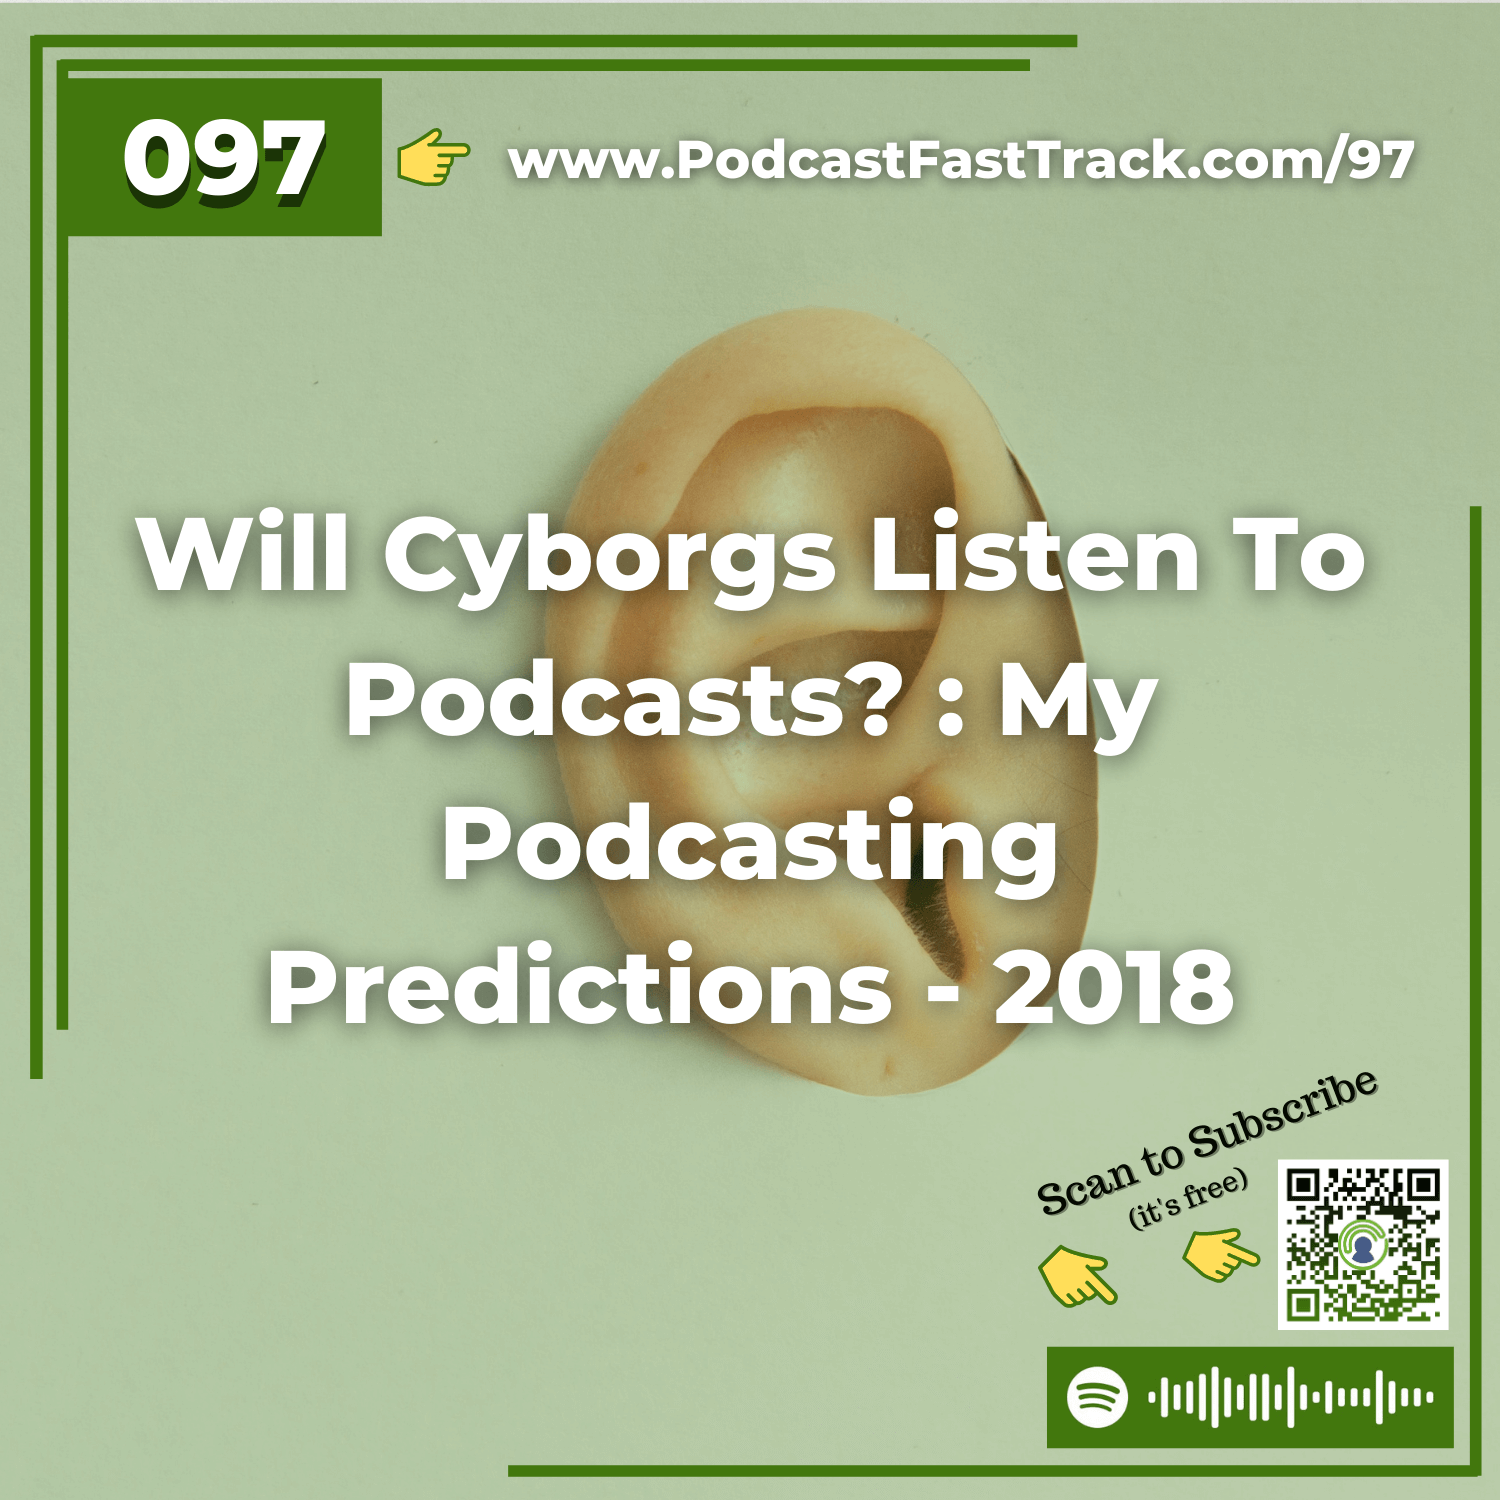 97: Will Cyborgs Listen To Podcasts? : My Podcasting Predictions - 2018